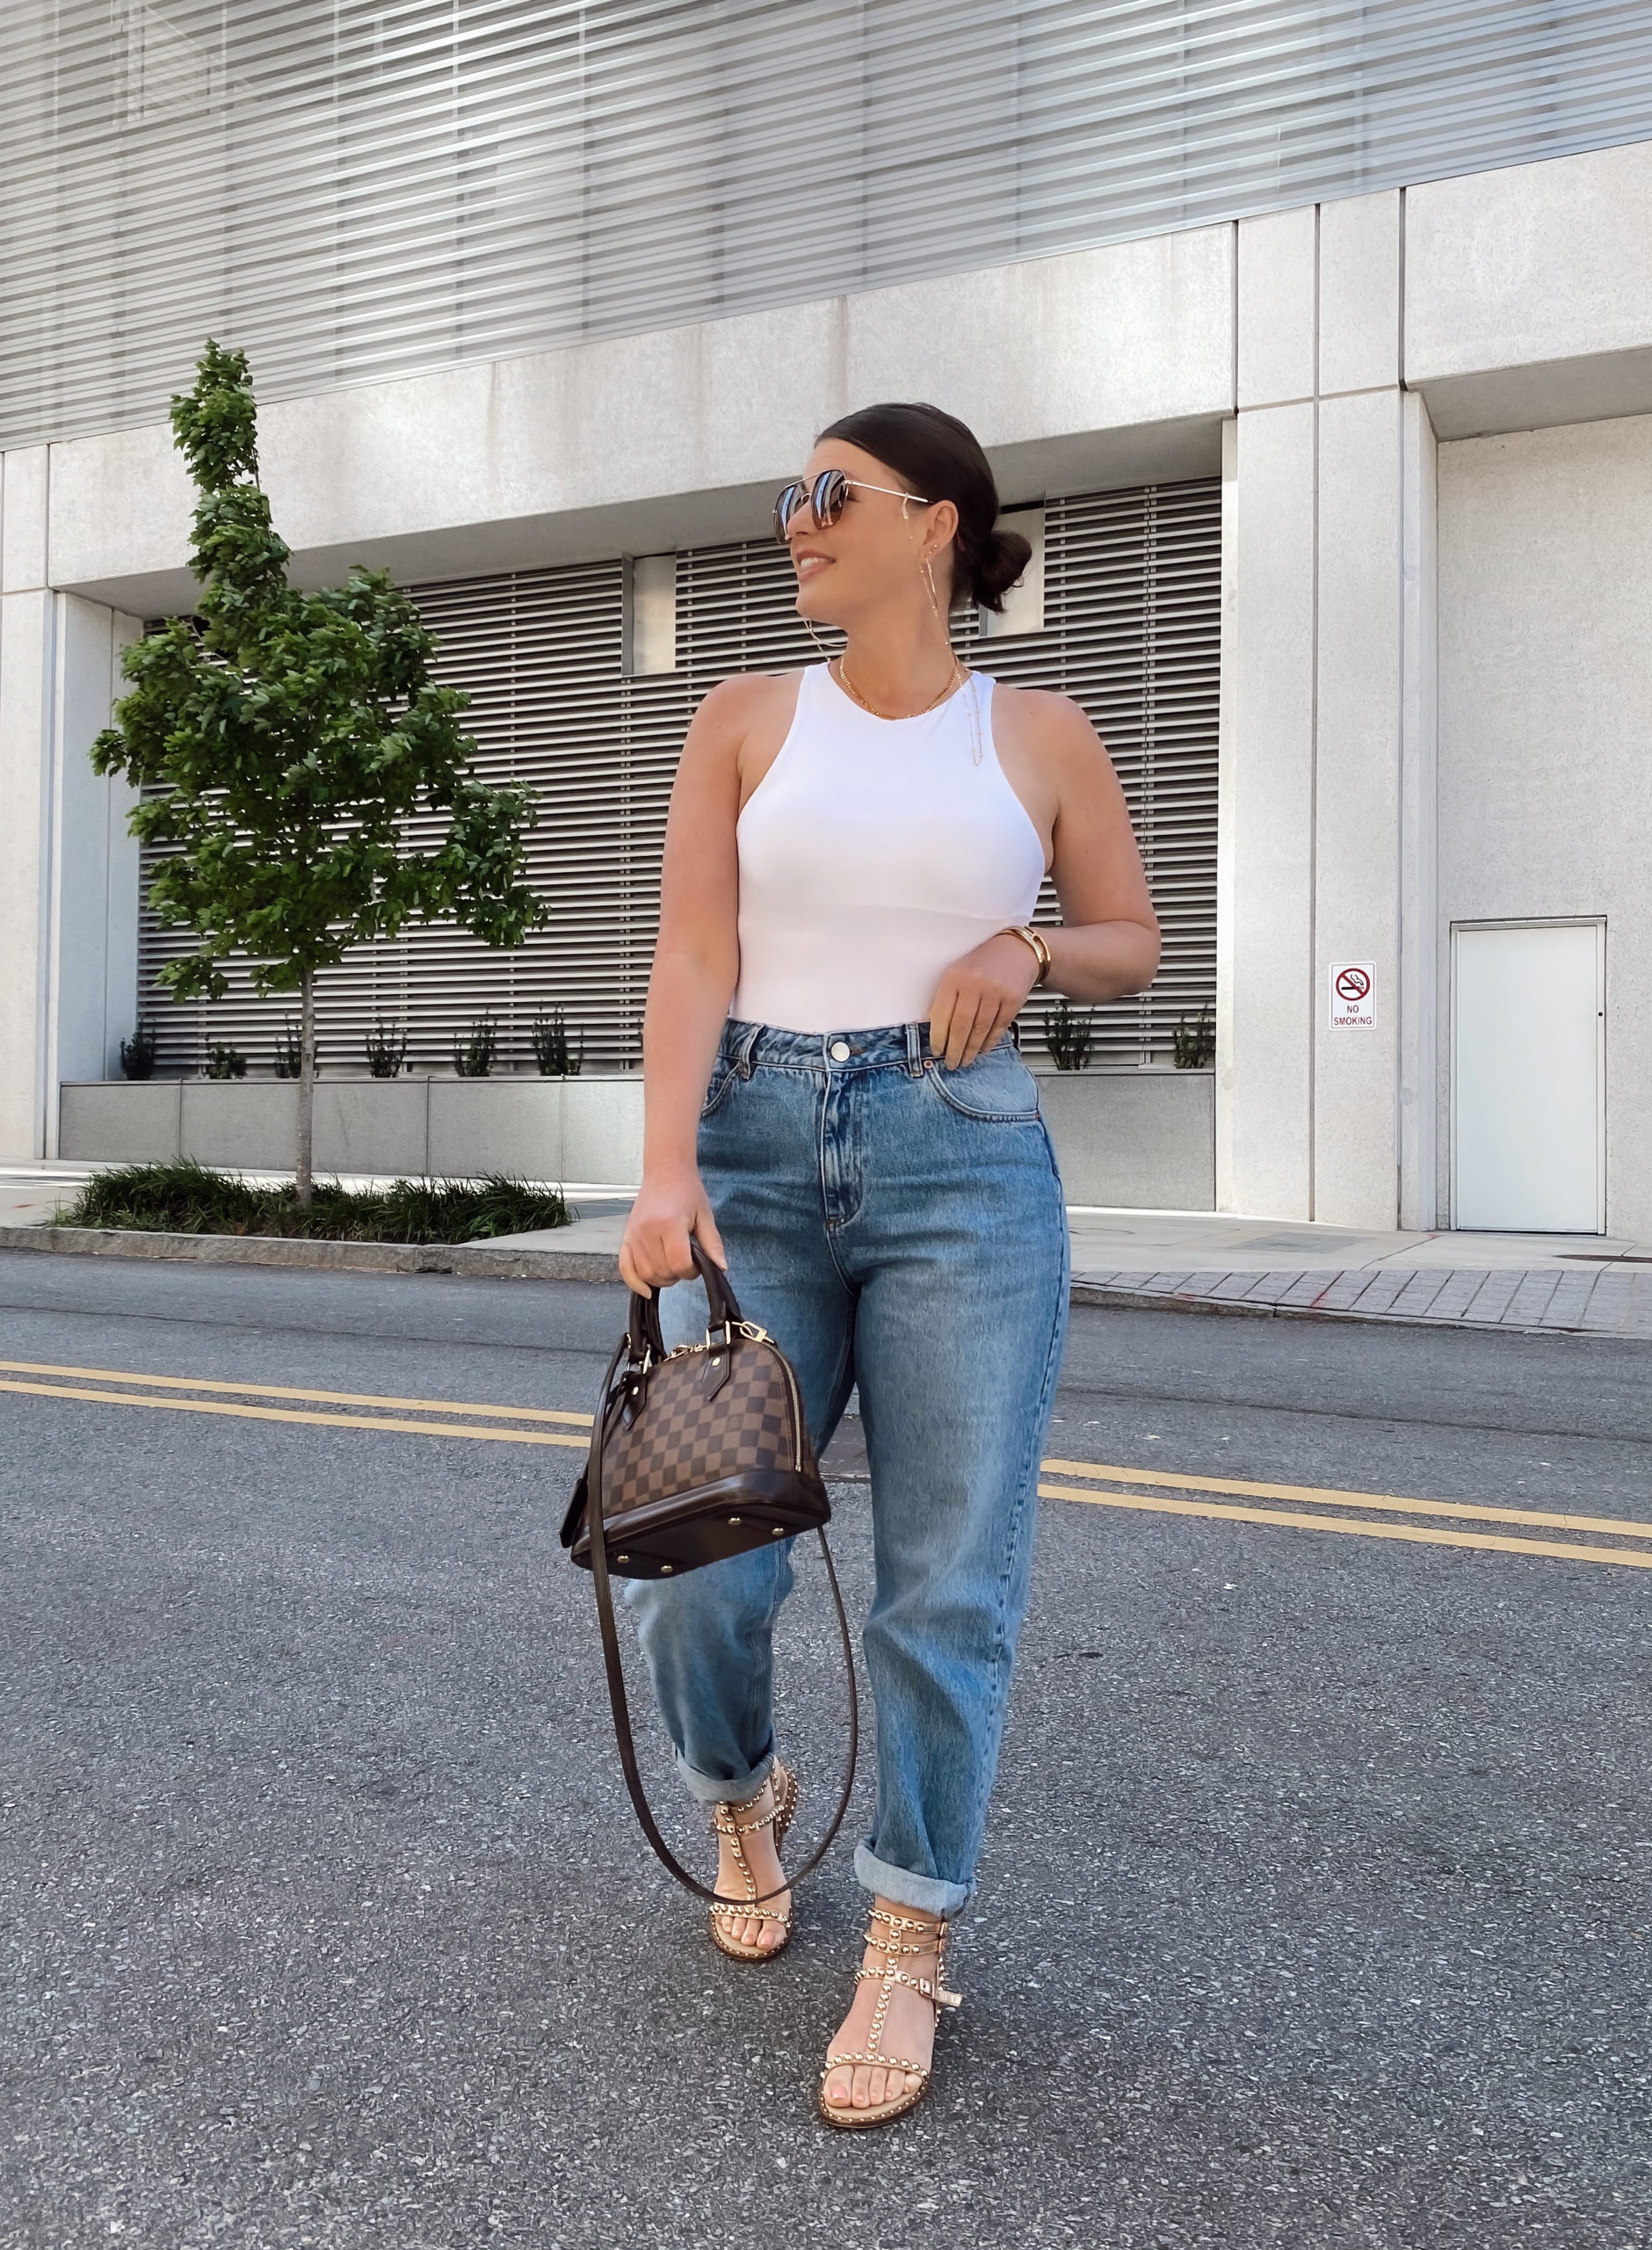 5 WAYS TO WEAR SLOUCHY JEANS | THE RULE OF 5